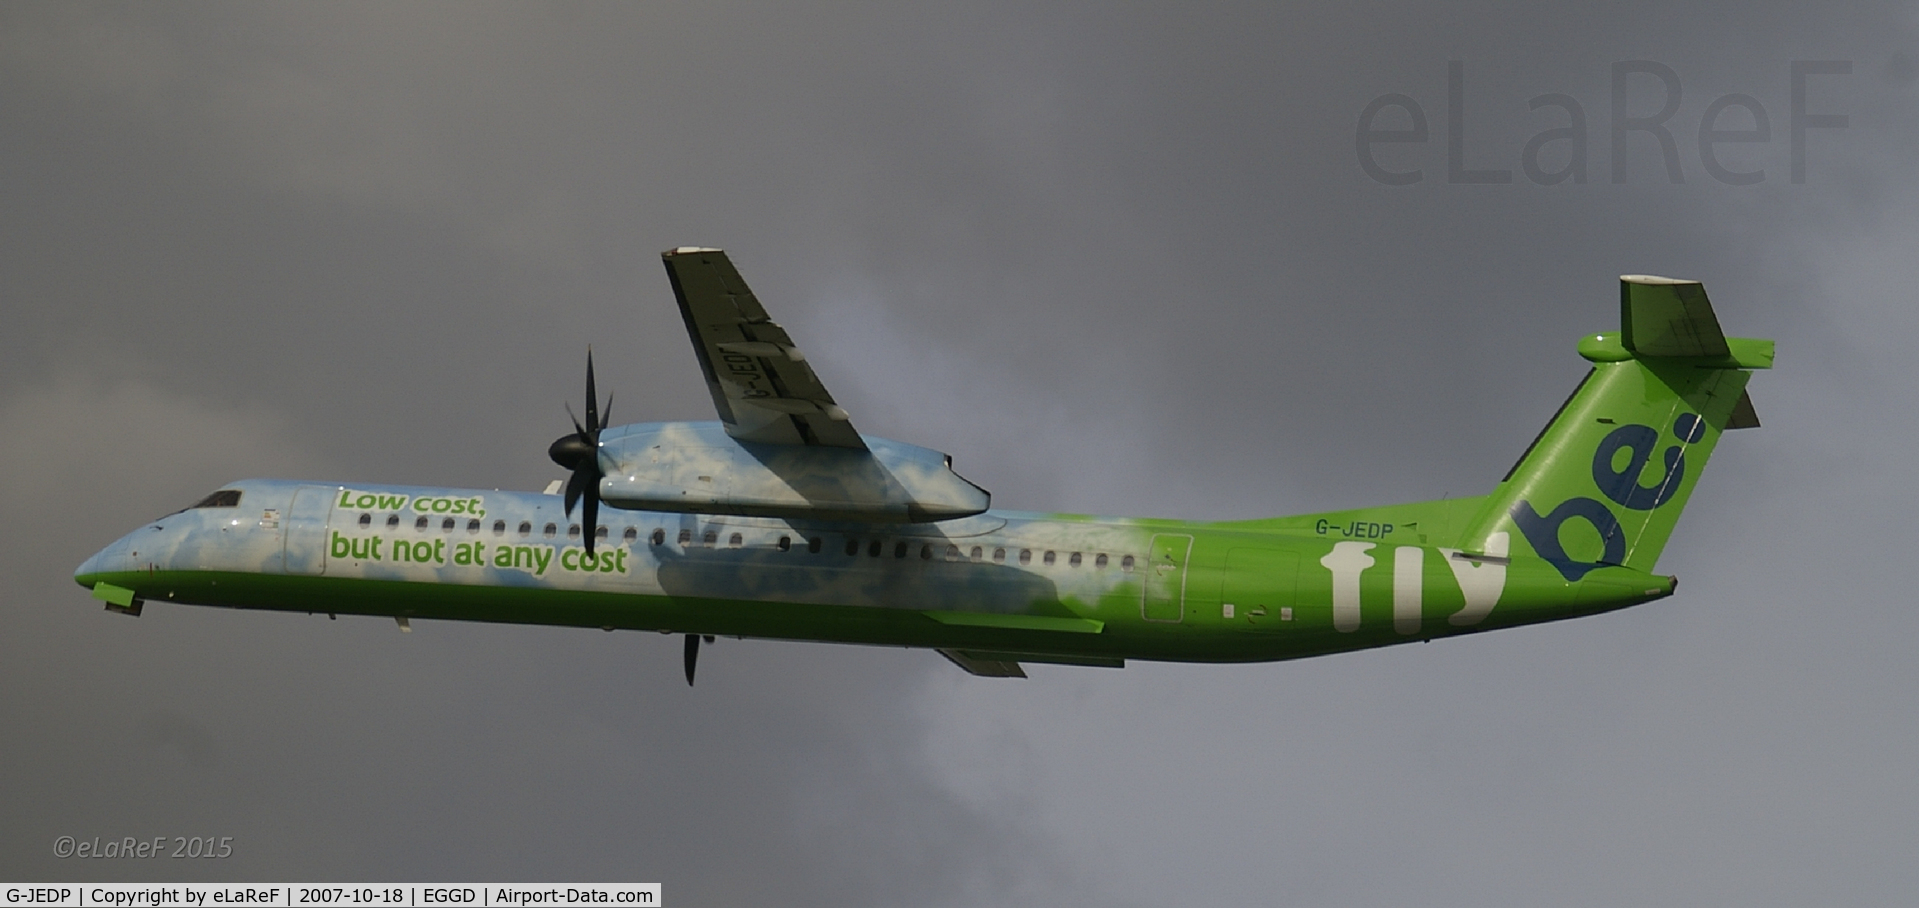 G-JEDP, 2003 De Havilland Canada DHC-8-402Q Dash 8 C/N 4085, In the green 'Low-Cost, but not at any cost' scheme